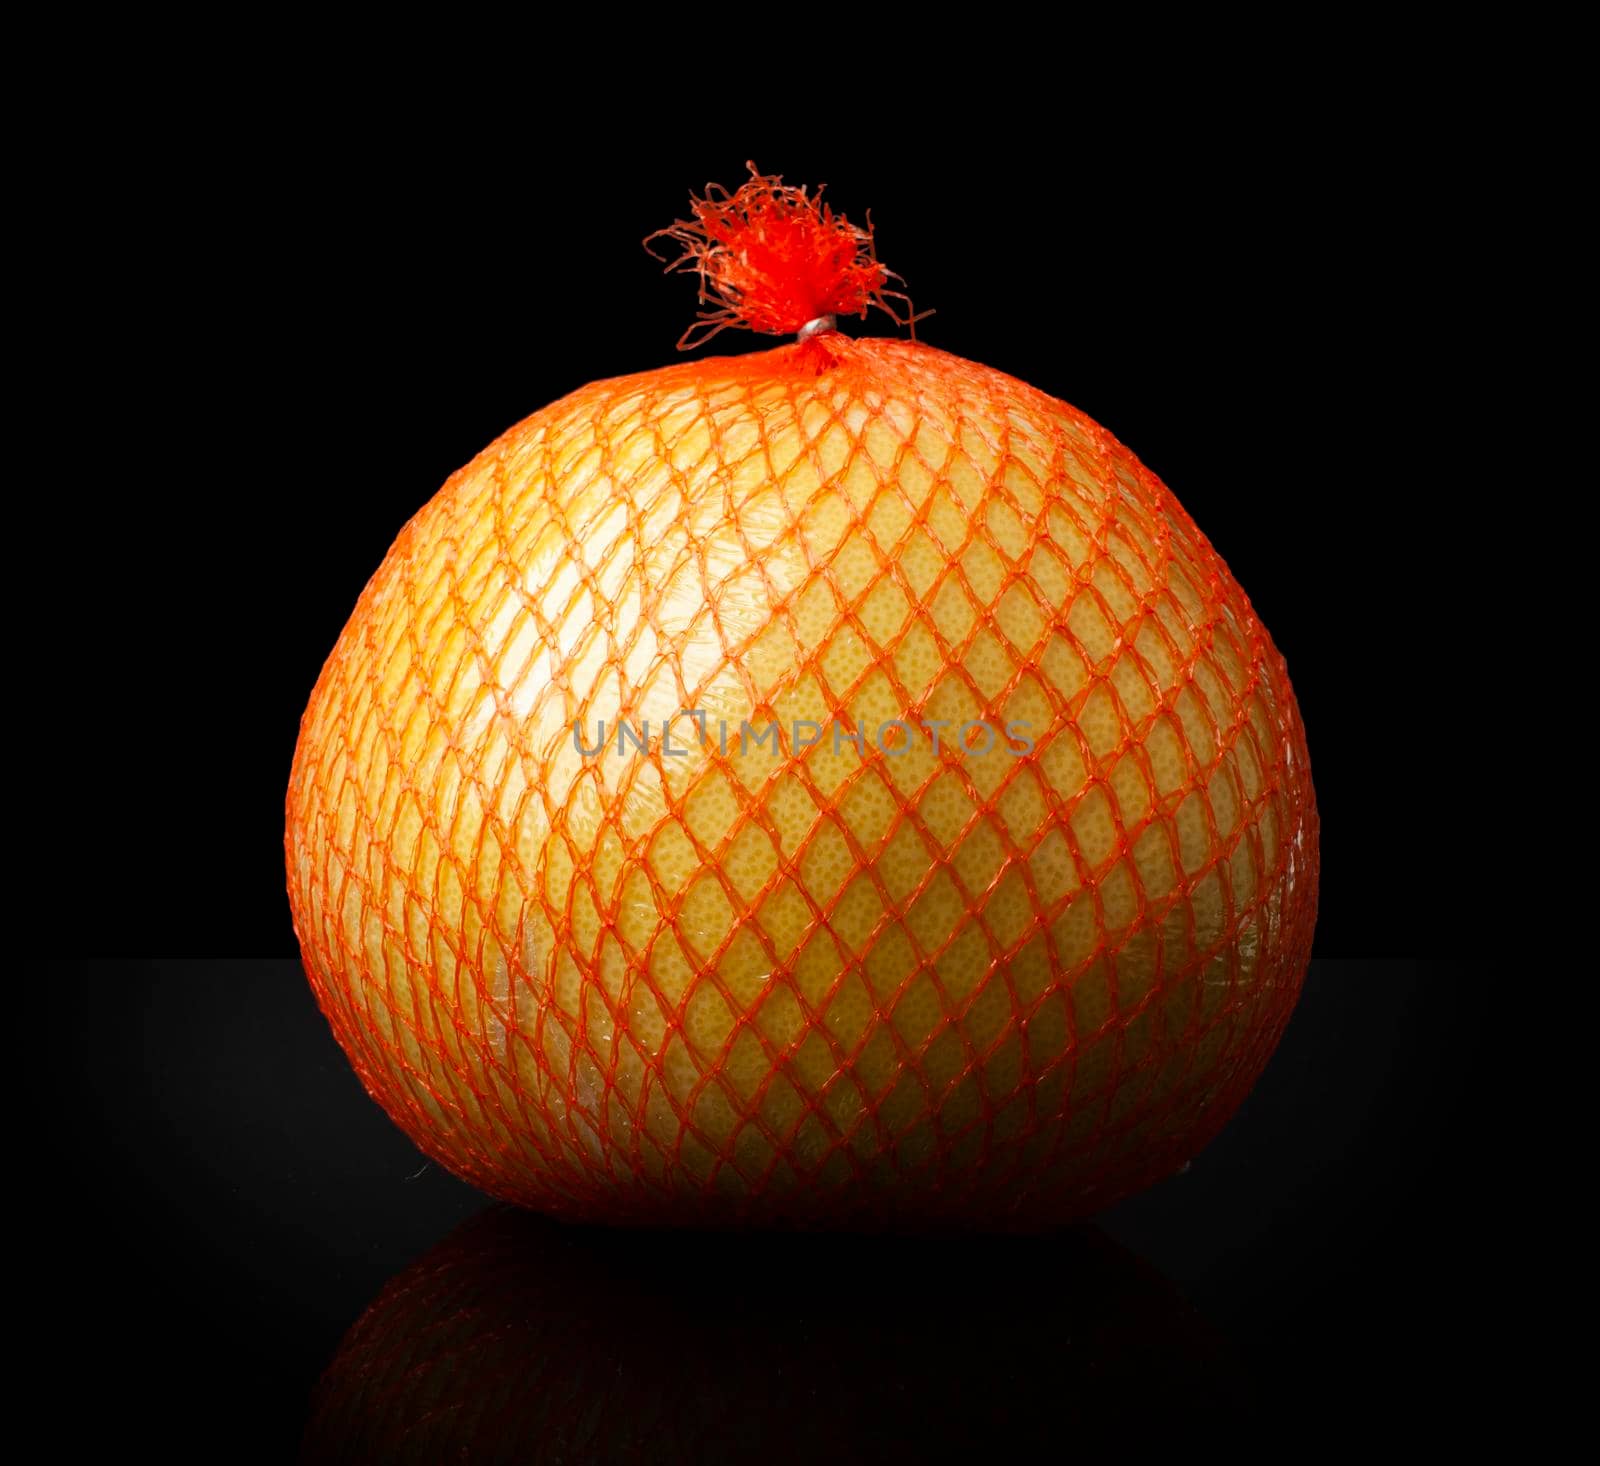 Pomelo citrus fruit in a shipping orange package close up isolated on a black background